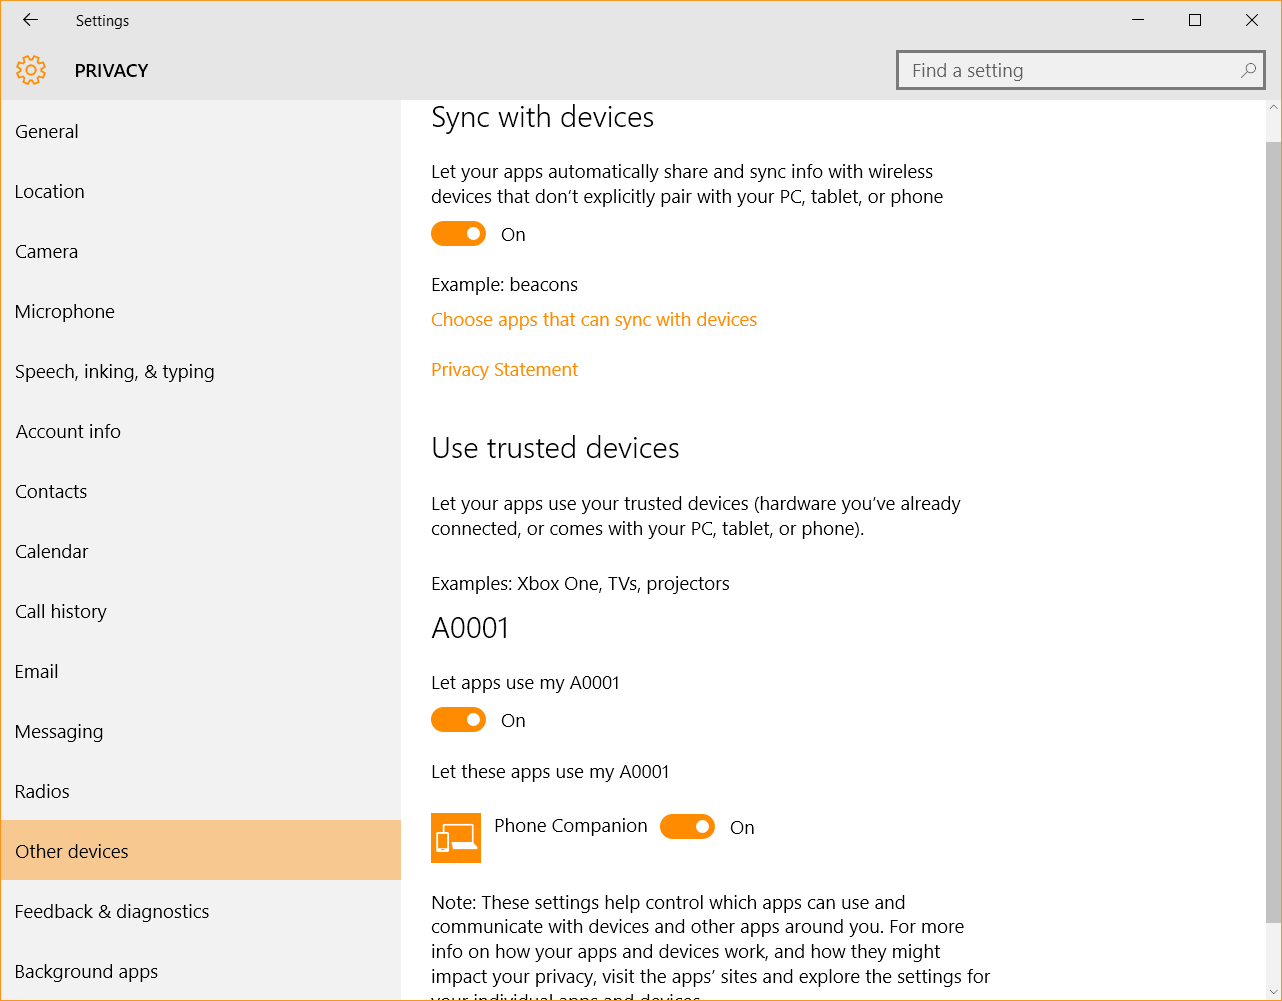 Windows 10 Security Guide - Other Devices Privacy Settings